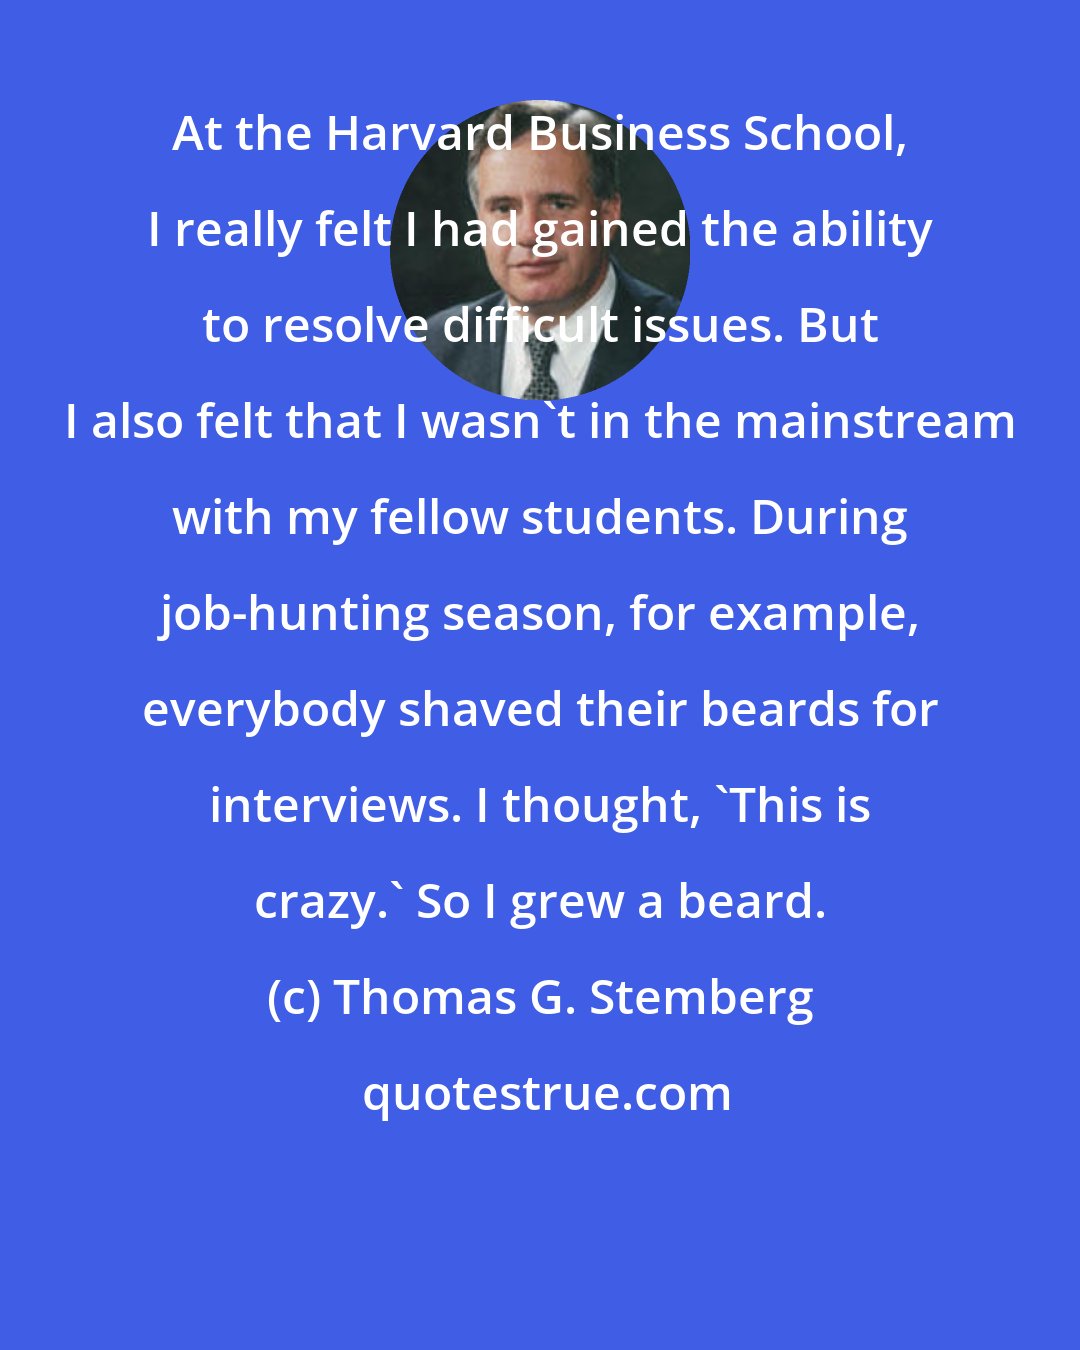 Thomas G. Stemberg: At the Harvard Business School, I really felt I had gained the ability to resolve difficult issues. But I also felt that I wasn't in the mainstream with my fellow students. During job-hunting season, for example, everybody shaved their beards for interviews. I thought, 'This is crazy.' So I grew a beard.